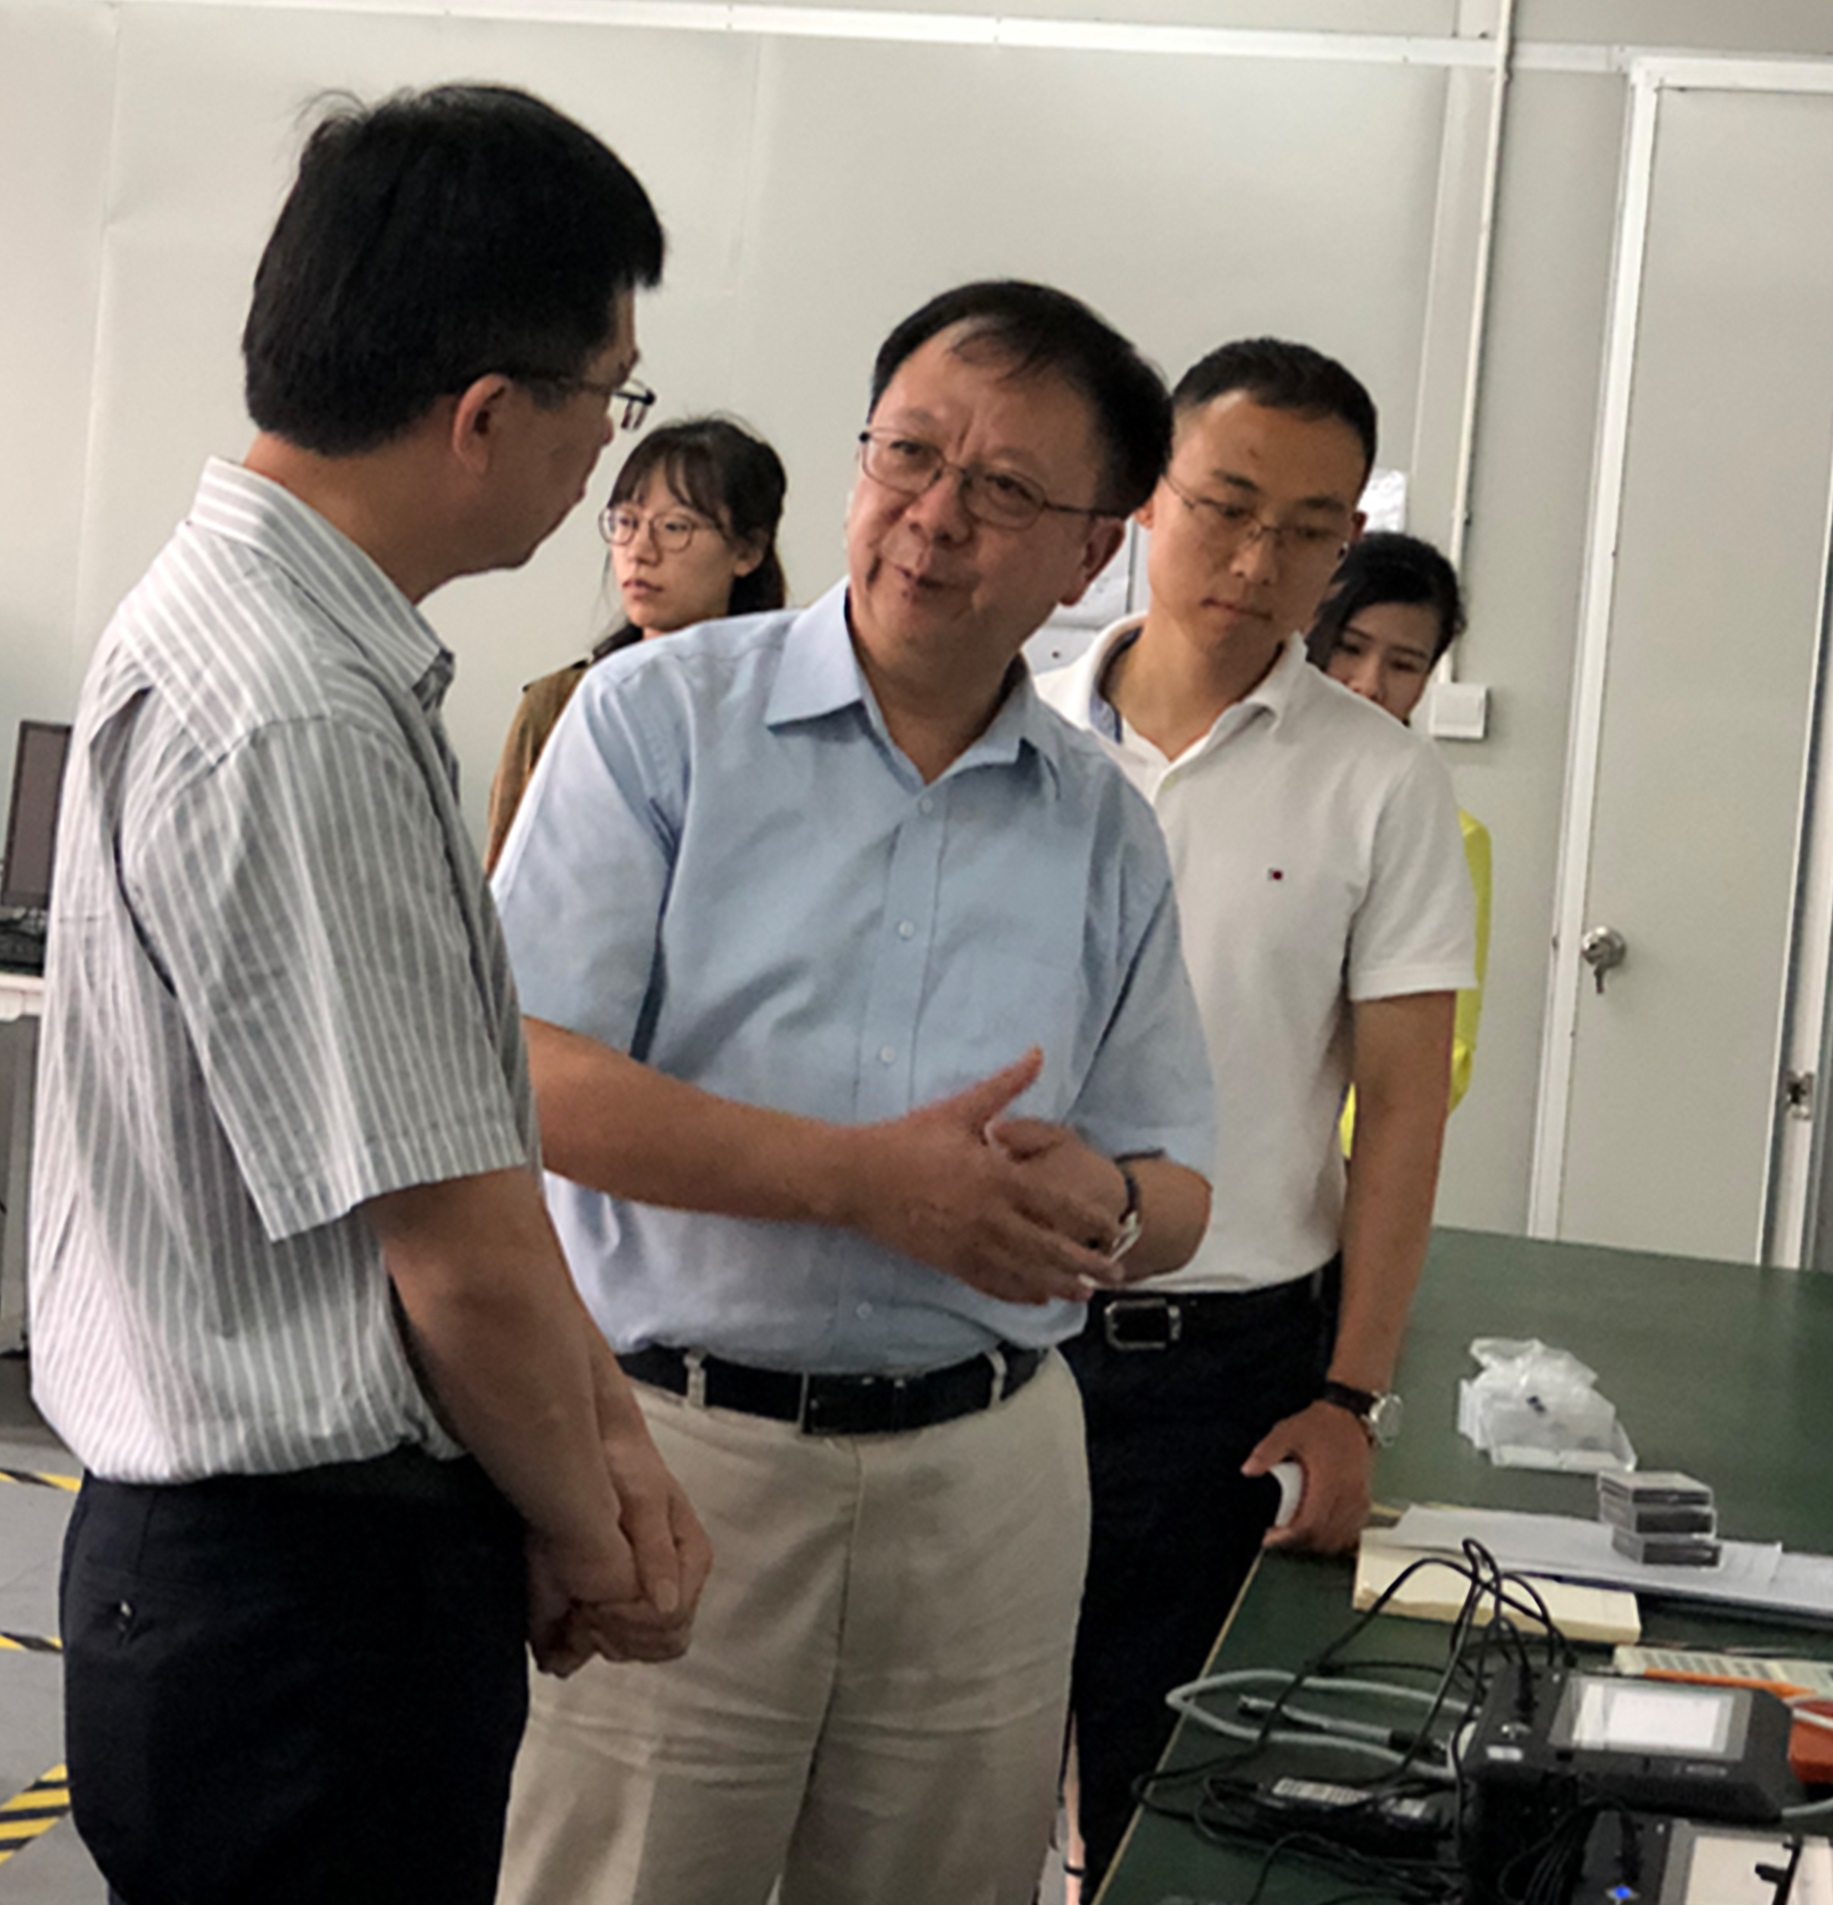 Prof. WEN (Middle) and Dr. GAO (right) introduce the theories behind their novel detection device in their research base at Shenzhen.